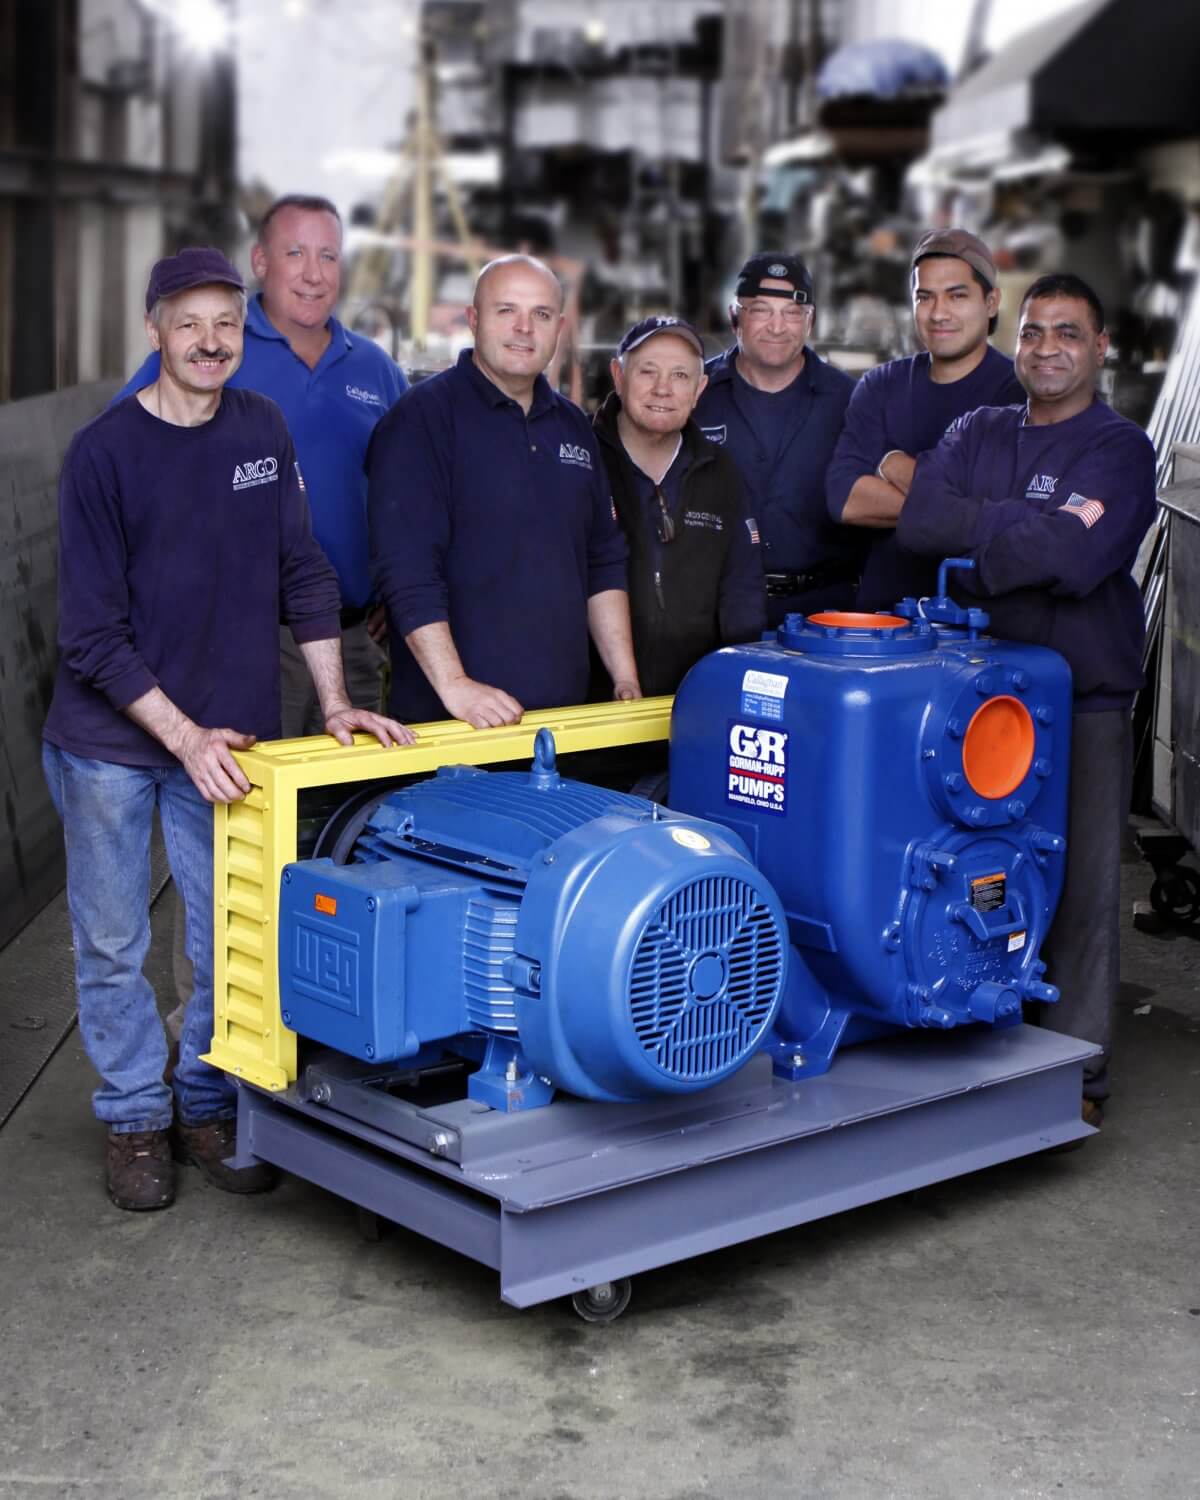 Callaghan Pump: A Company with Experience in Water Pump Systems and Pump Repair